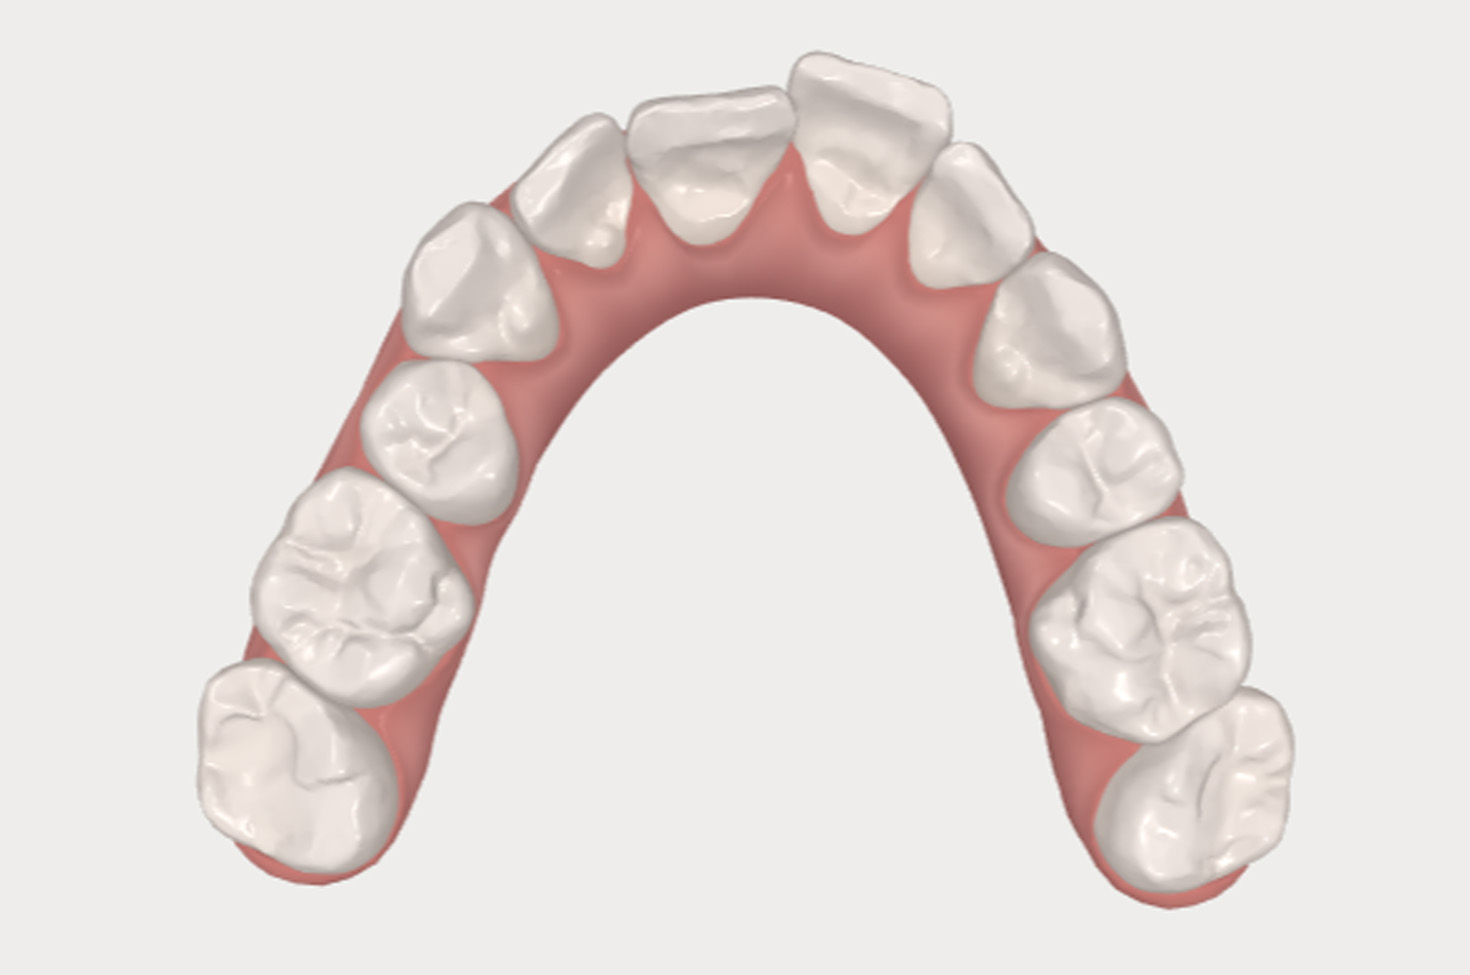 Simulation images of before and after teeth straightening